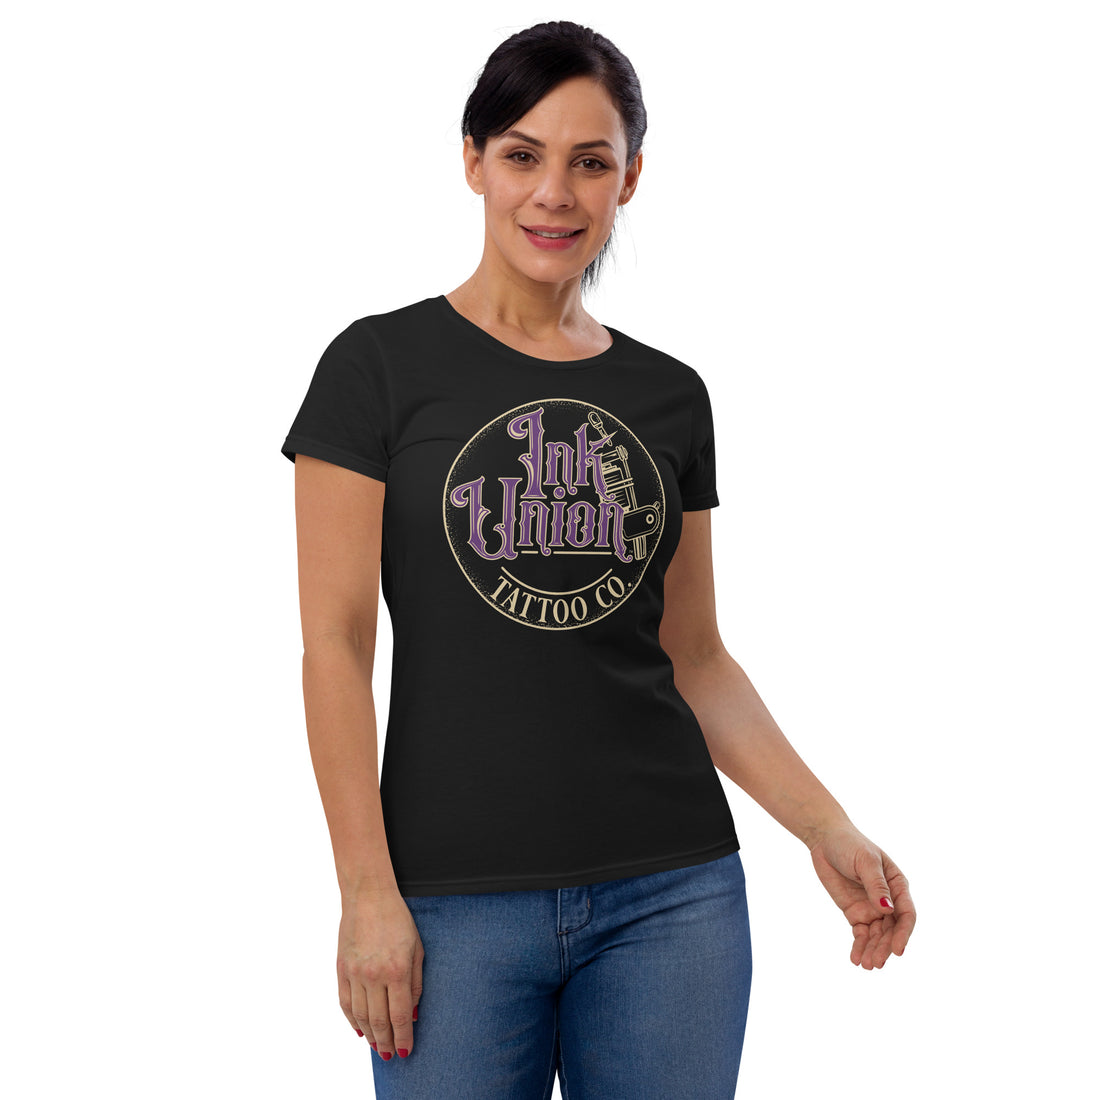 An attractive woman wearing a black t-shirt with a gold circle containing fancy lettering in purple and gold that says Ink Union and a gold tattoo machine peeking out from behind on the right side.  There is a dot work gradient inside the circle, and the words Tattoo Co. in gold are at the bottom of the design.